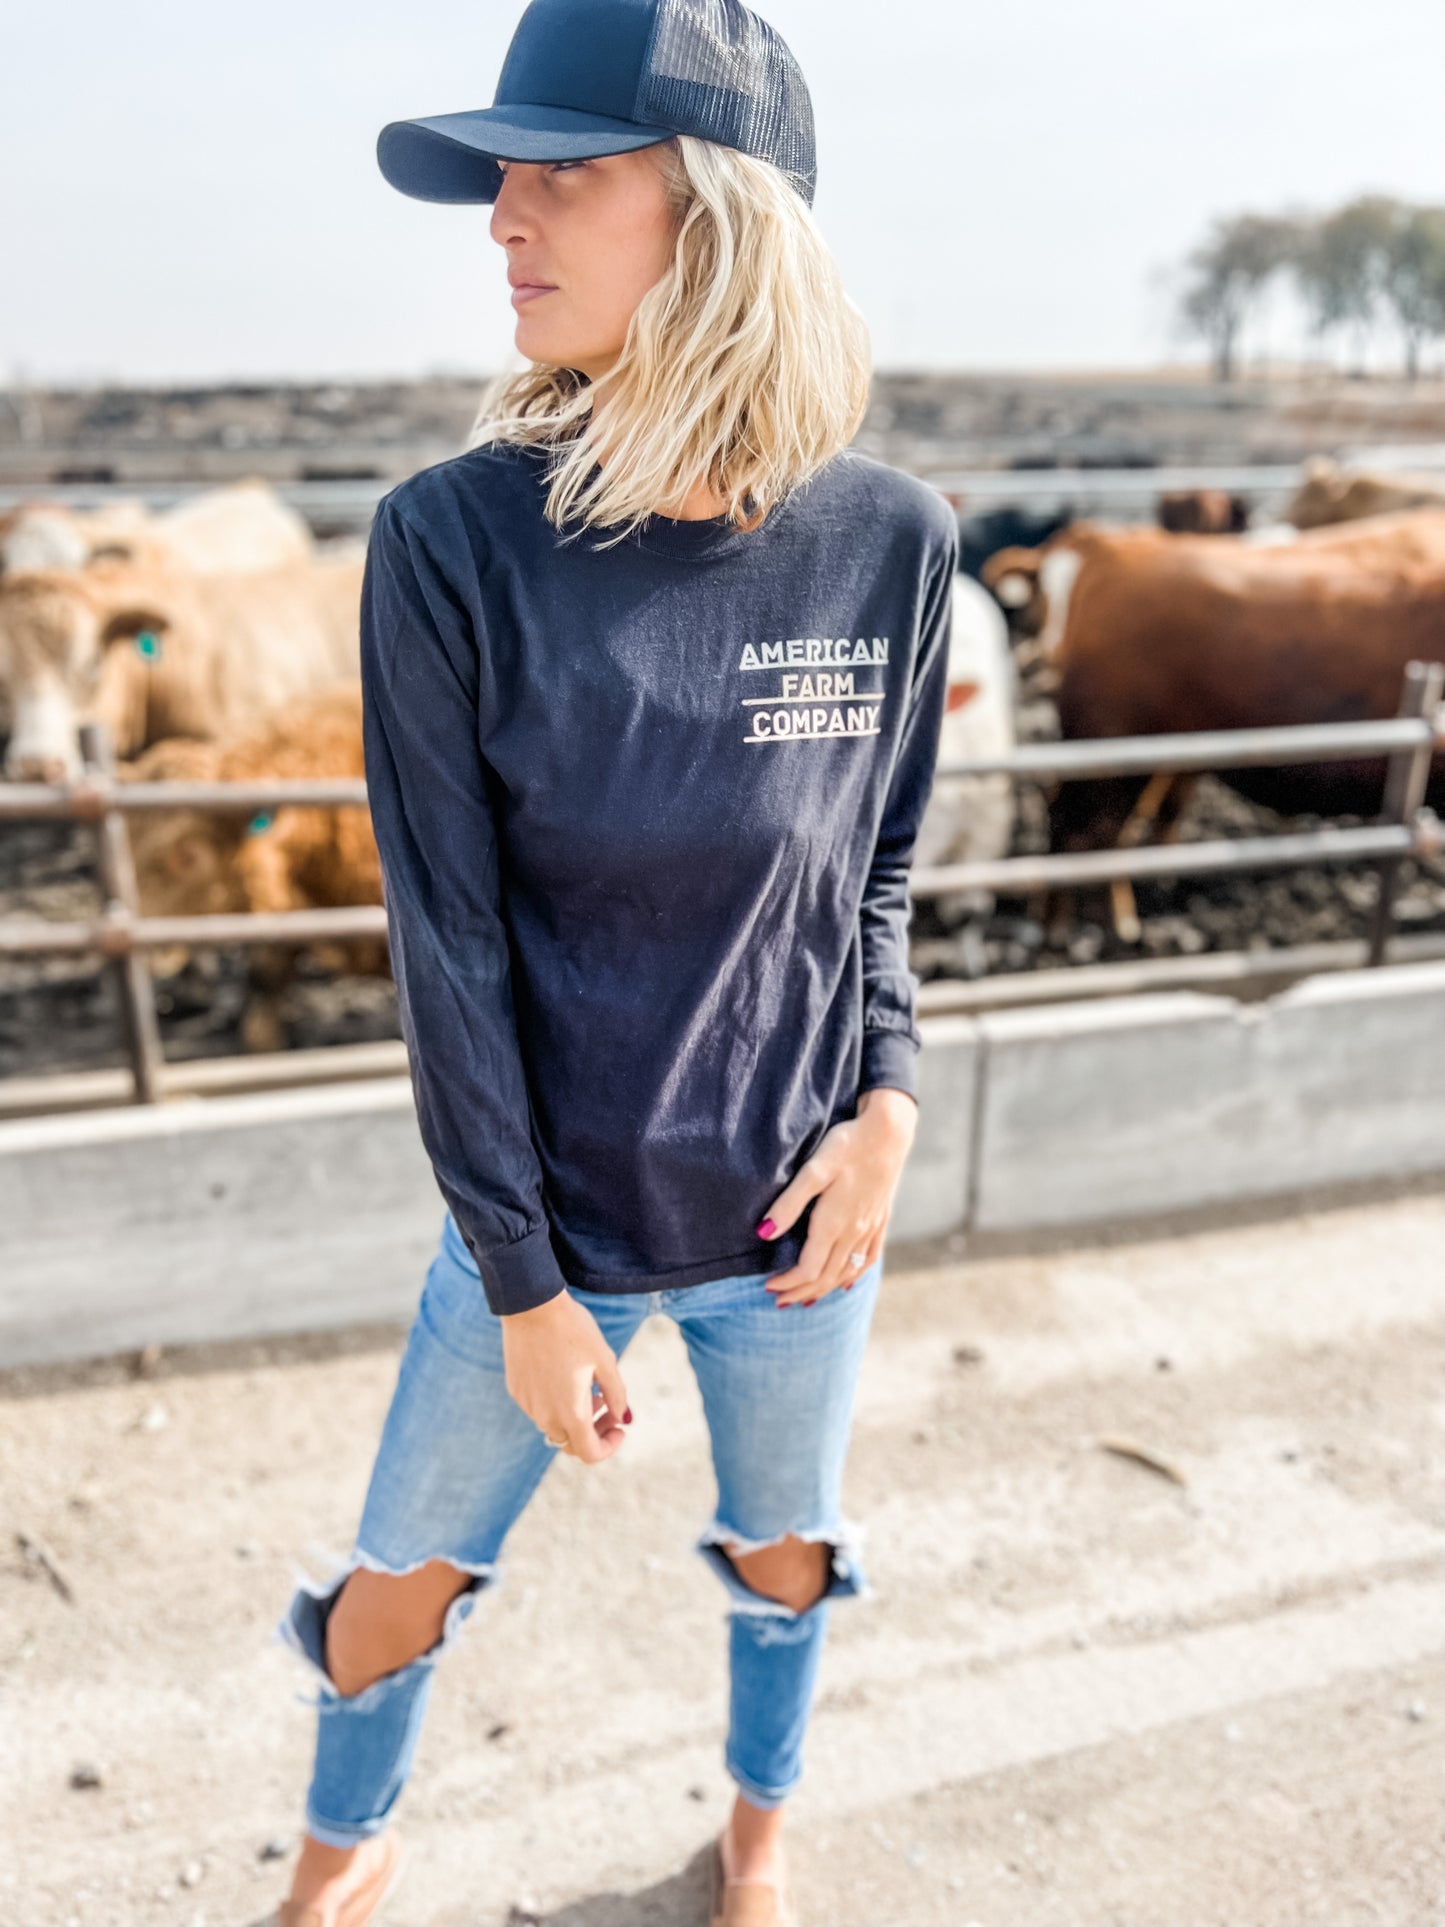 'Here's To the Farmers' Black Long Sleeve